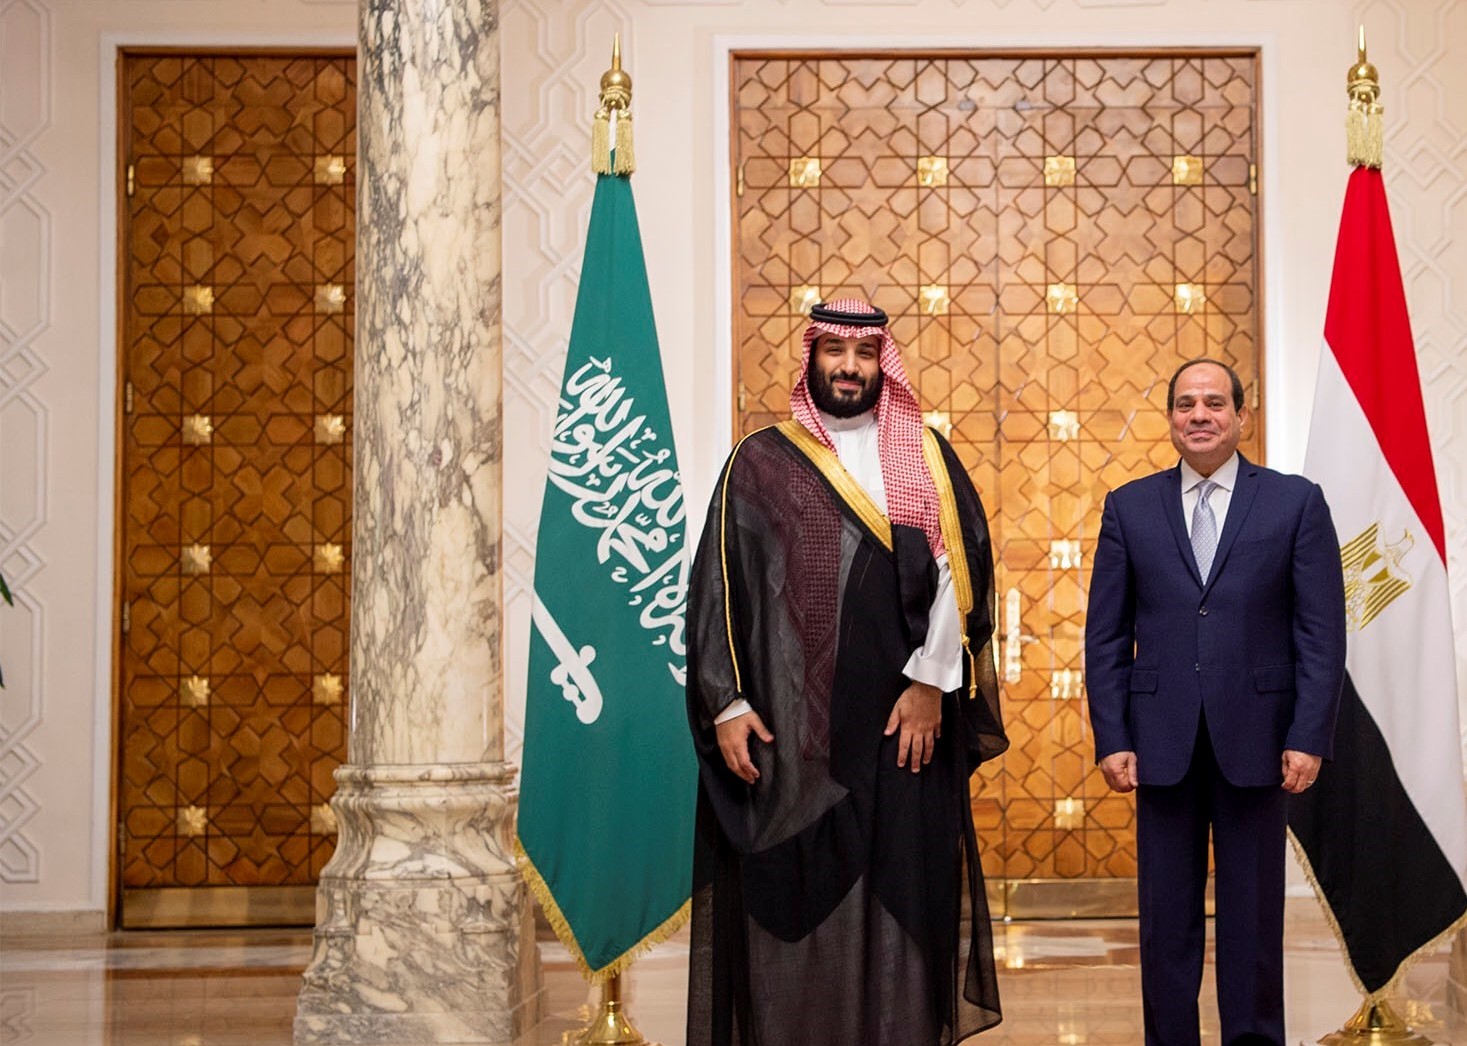 Saudi Arabia's Crown Prince Mohammed bin Salman stands next to Egyptian President Abdel Fattah al-Sisi at the Presidential Palace in Cairo, Egypt November 27, 2018. Bandar Algaloud/Courtesy of Saudi Royal Court/Handout via REUTERS  ATTENTION EDITORS - THIS PICTURE WAS PROVIDED BY A THIRD PARTY? - RC171E79B100